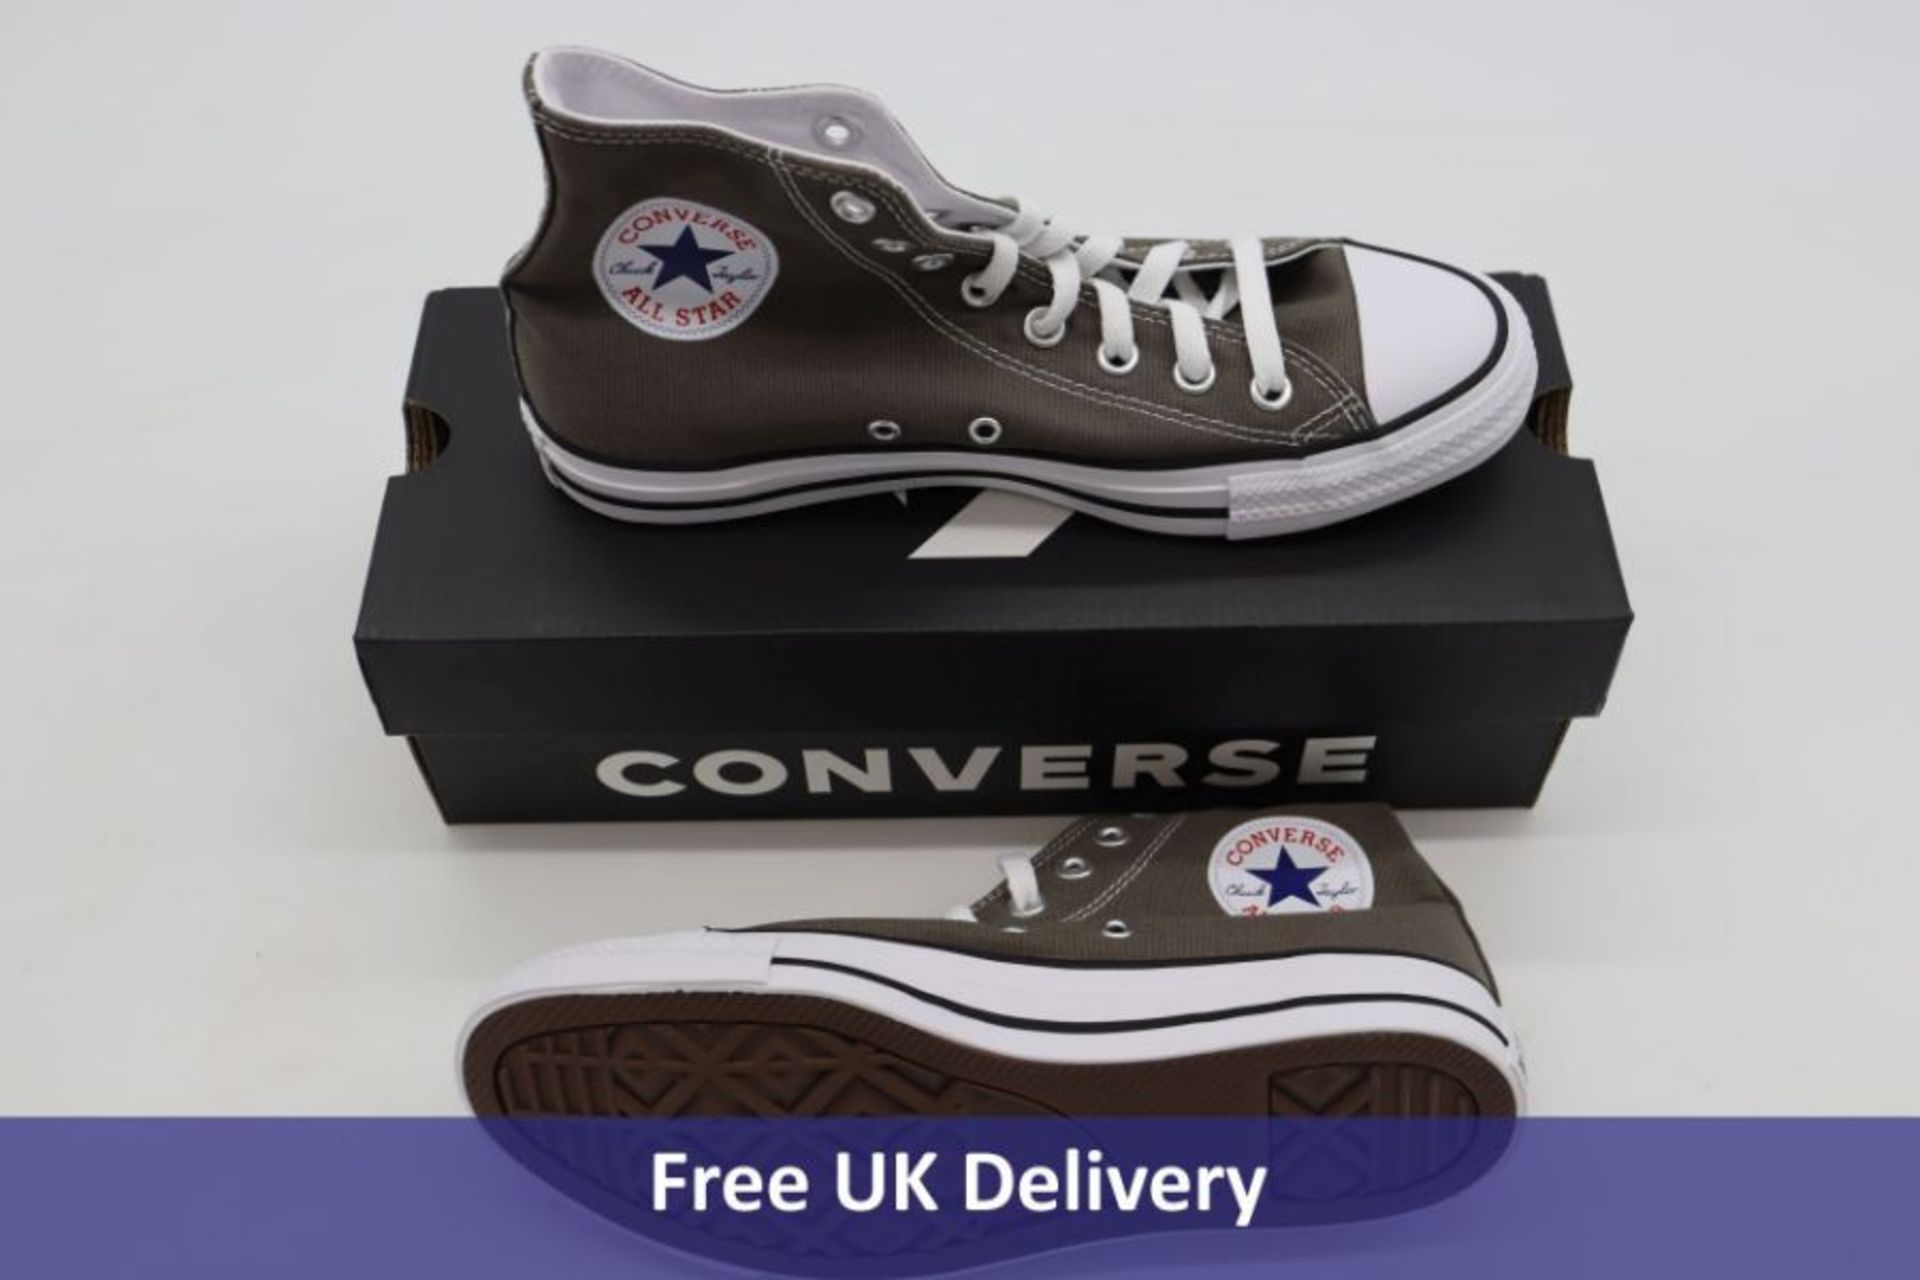 Converse Chuck Taylor All Star Seasonal Colour Canvas High Top Trainers, Charcoal, UK 8